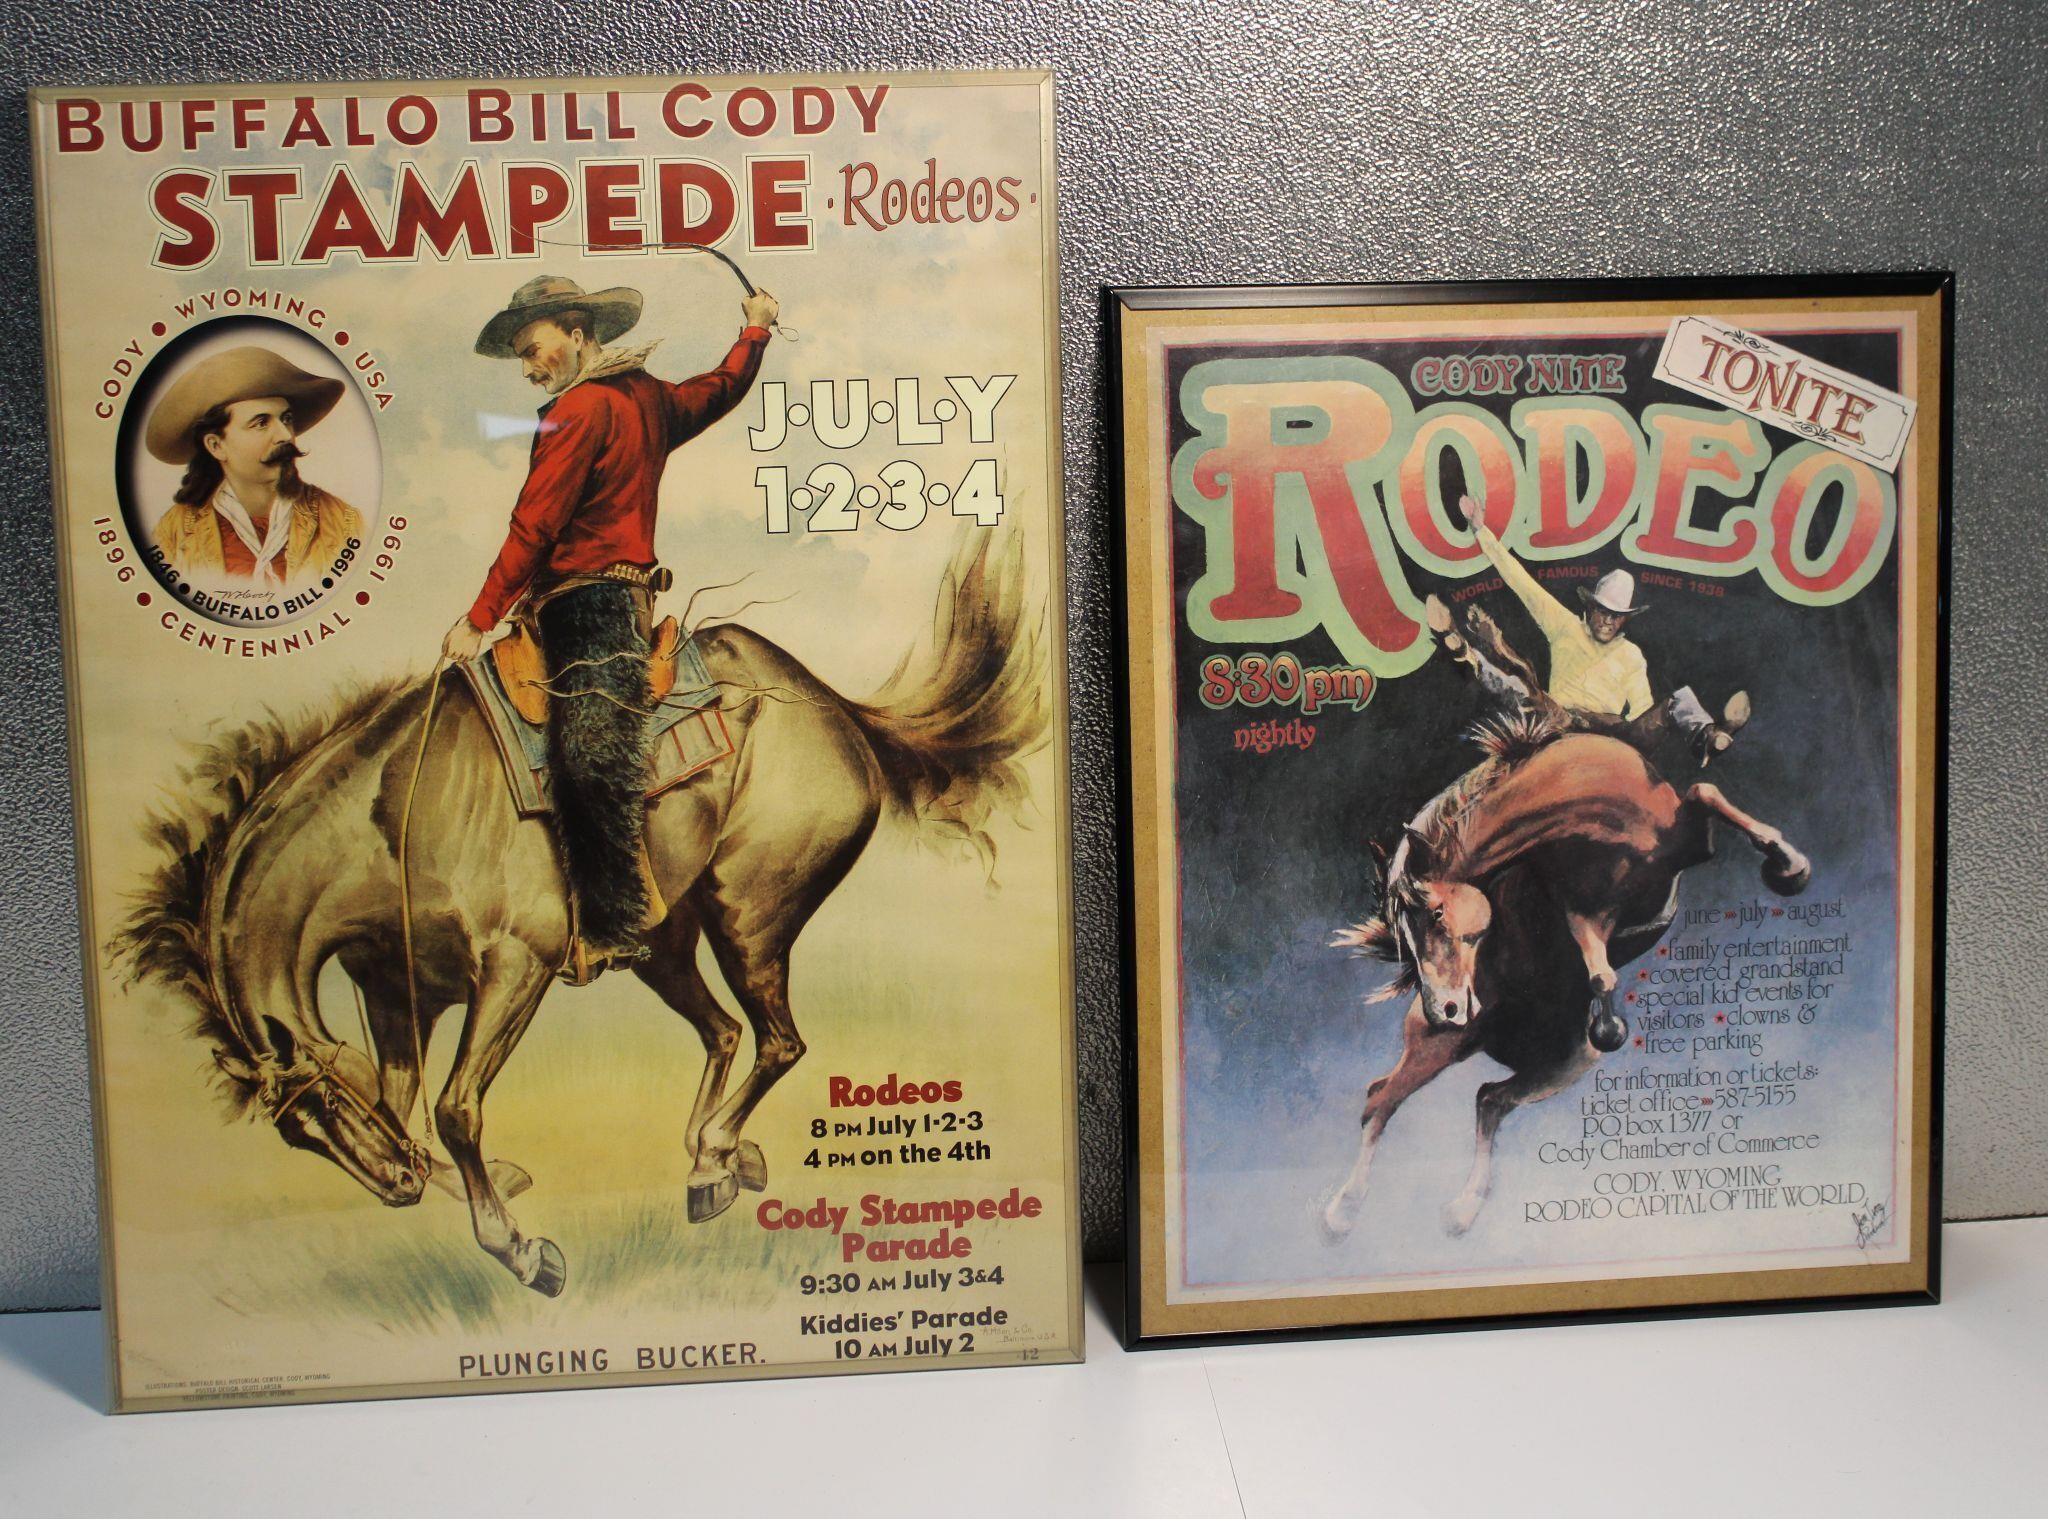 Buffalo Bill Cody Stampead & Rodeo Poster